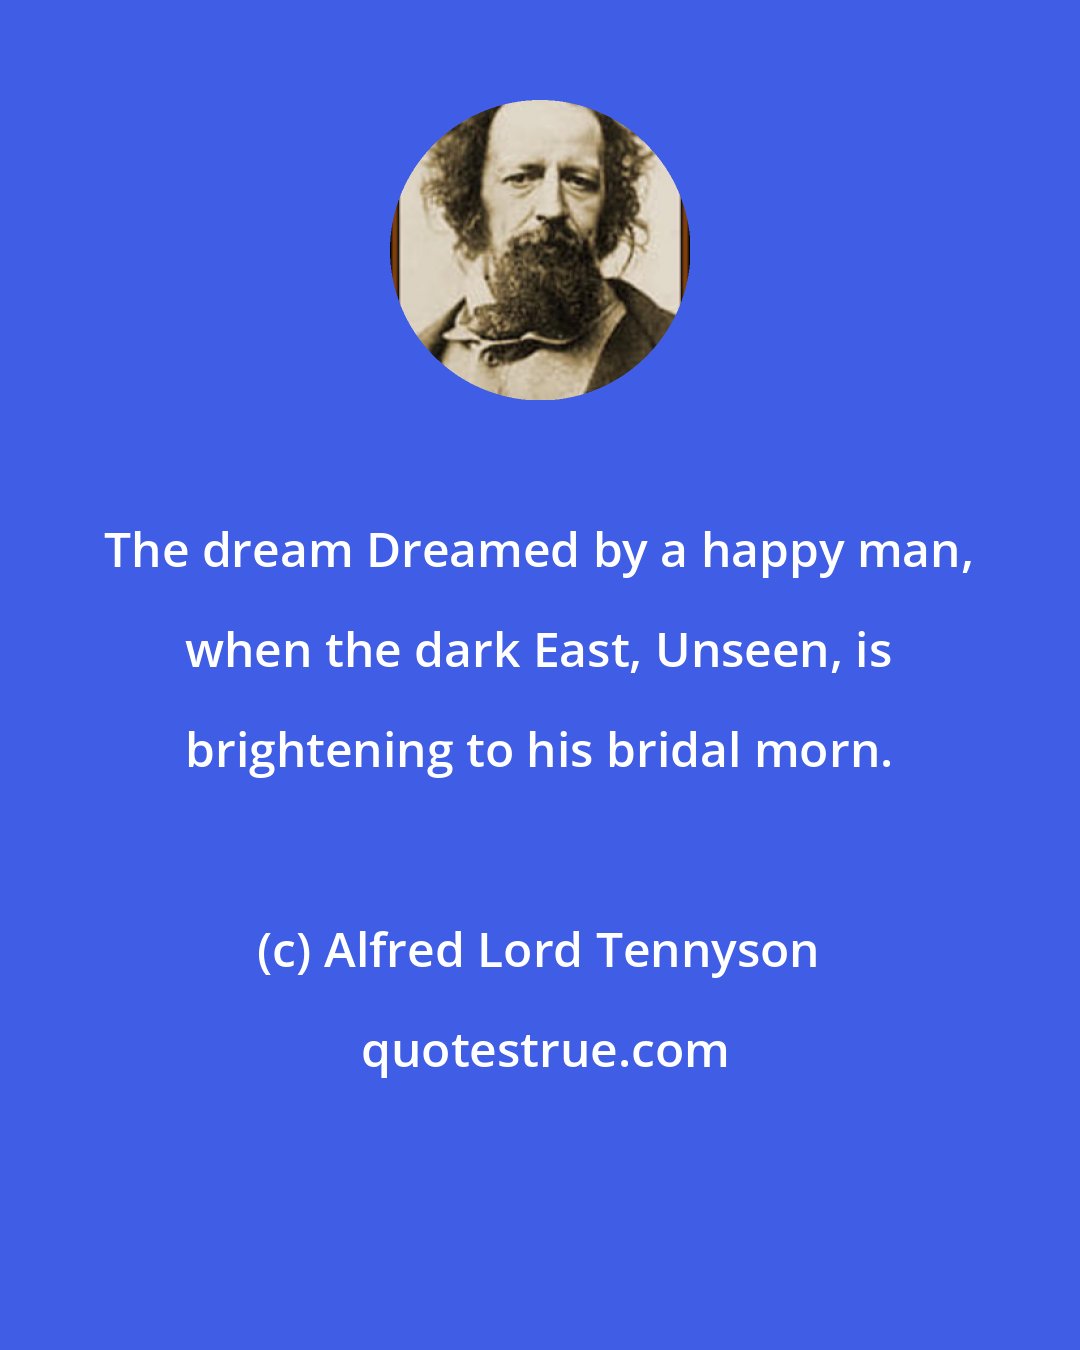 Alfred Lord Tennyson: The dream Dreamed by a happy man, when the dark East, Unseen, is brightening to his bridal morn.